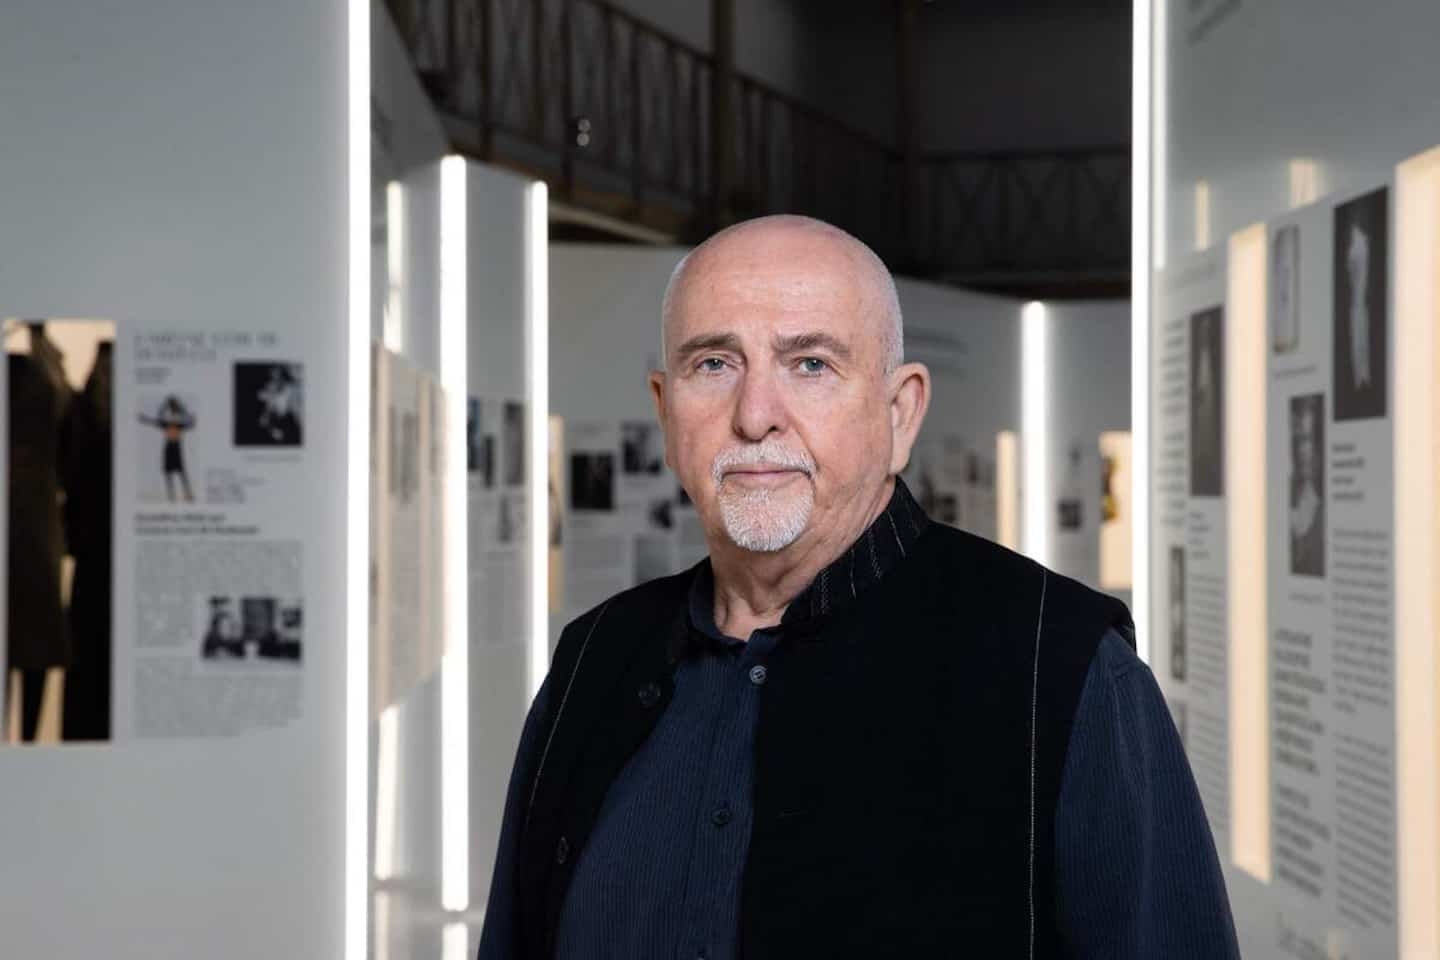 Album “i/o”: a new song by Peter Gabriel